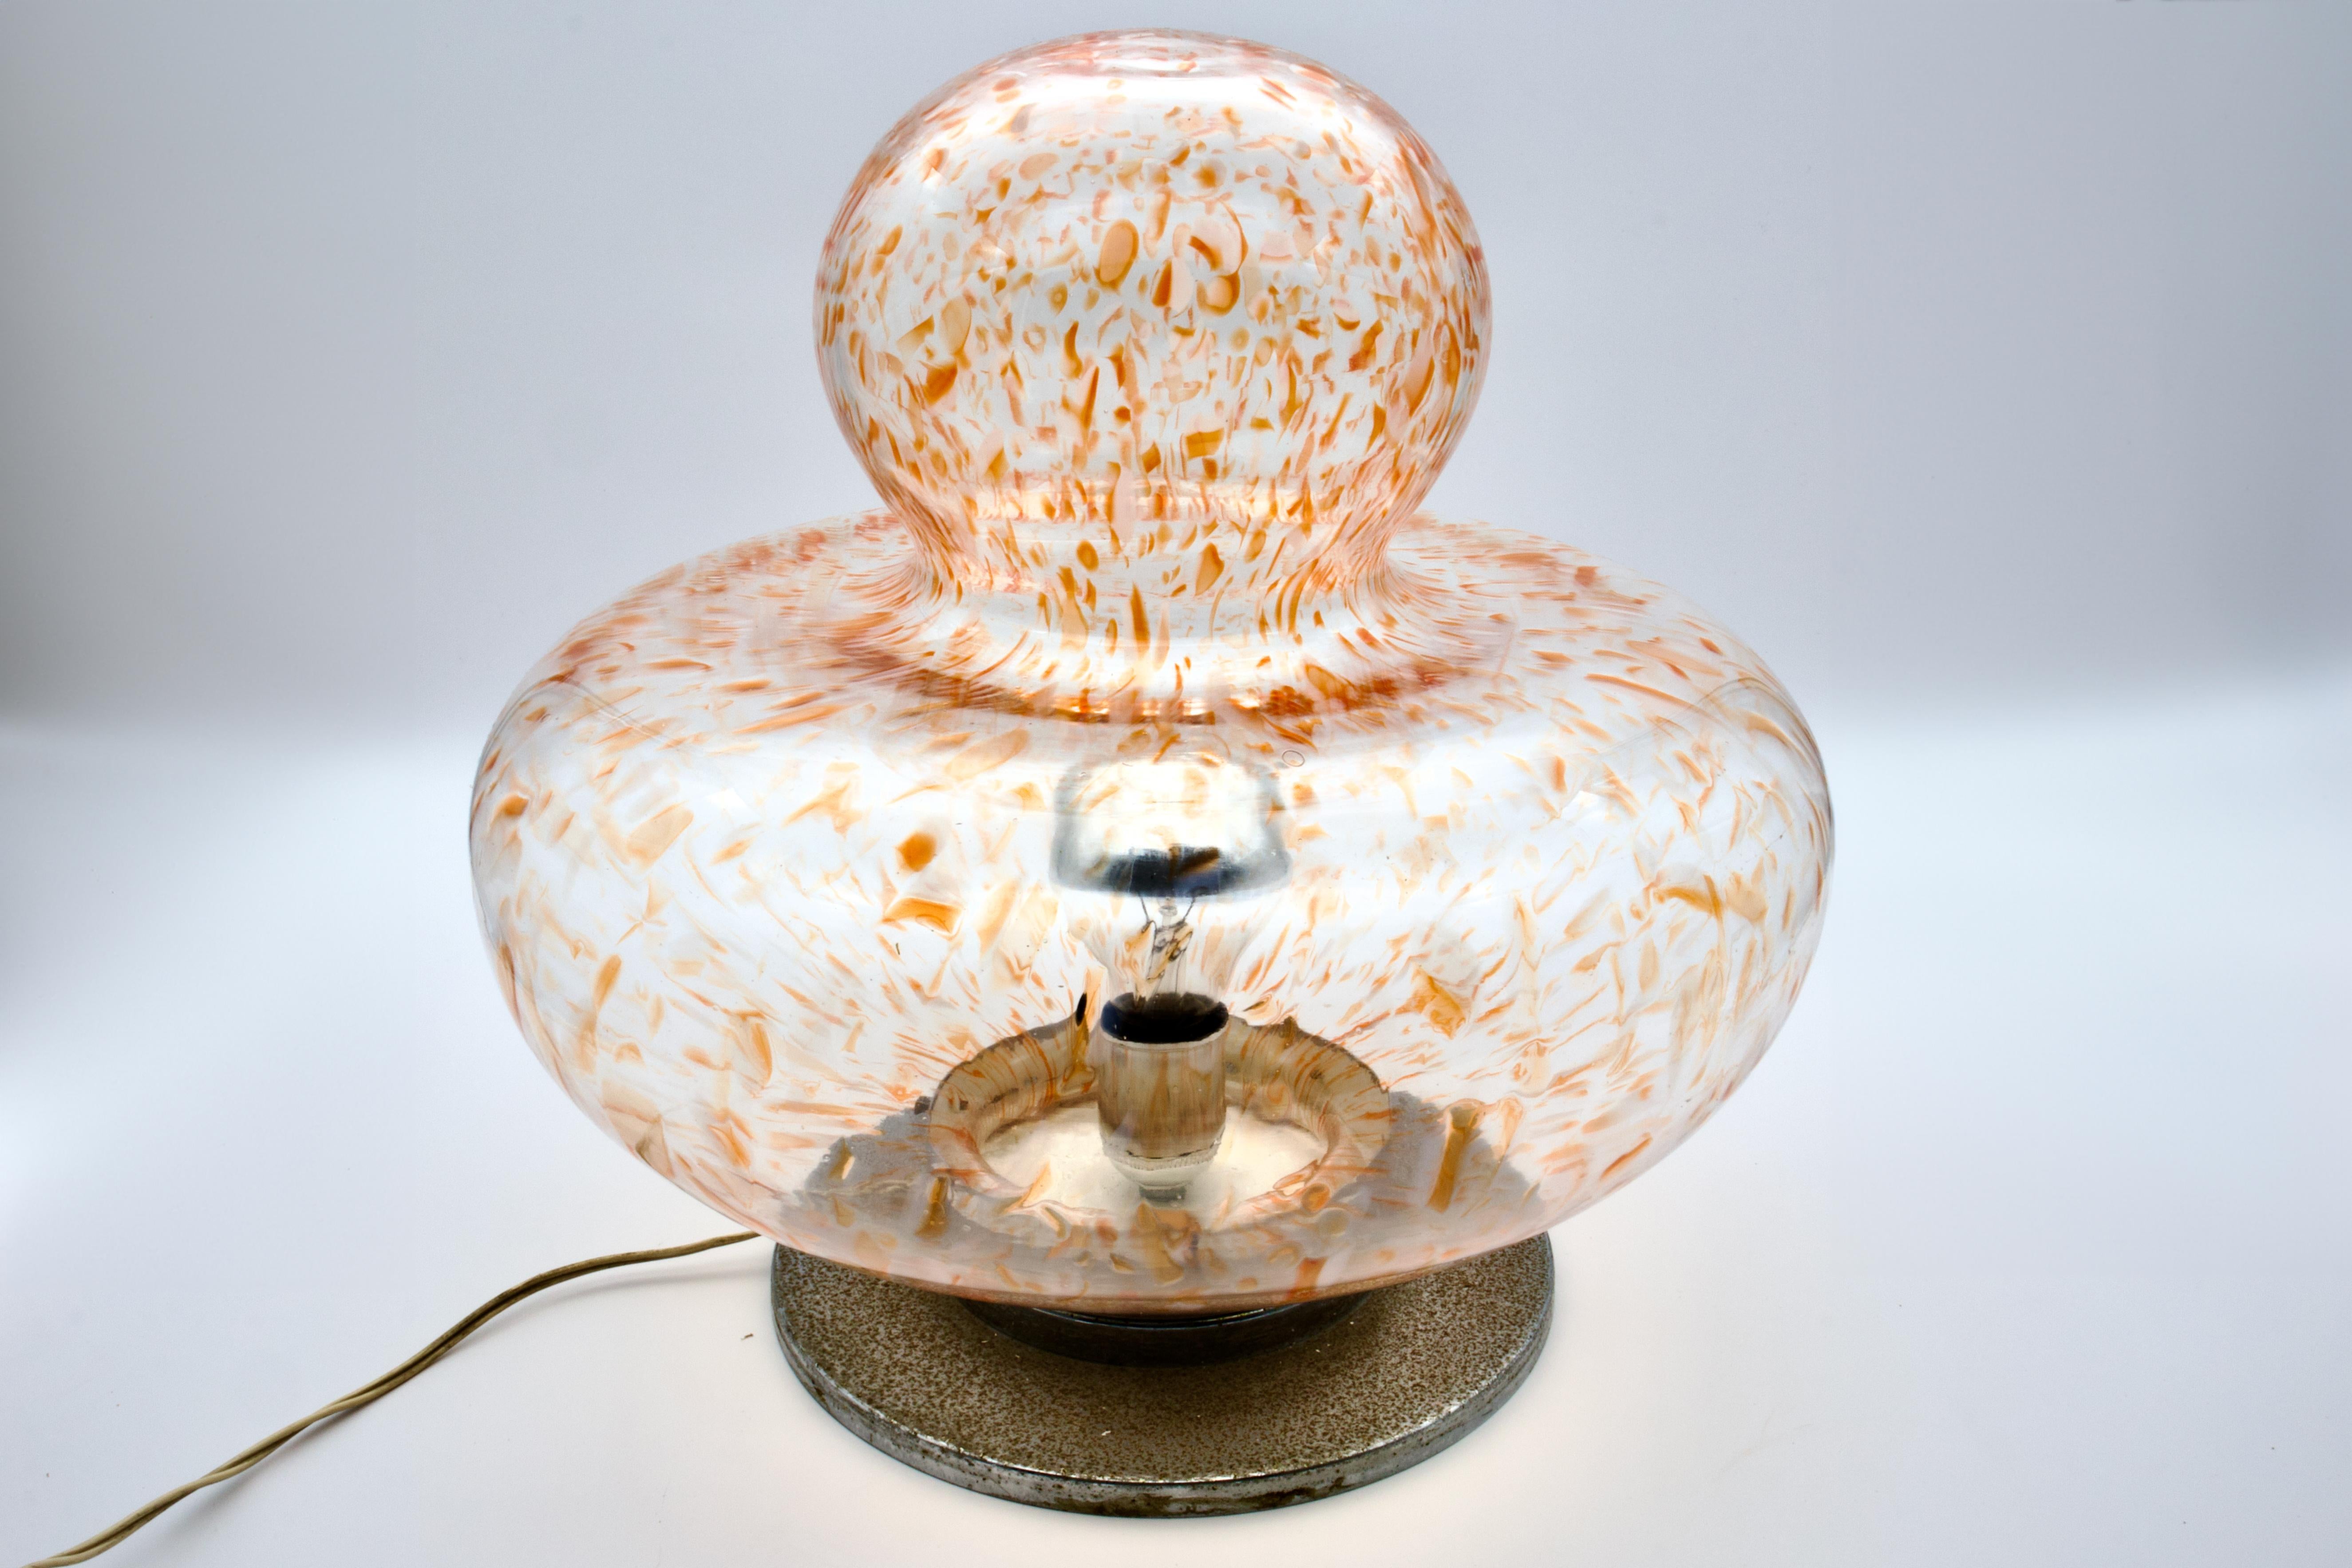 Delight in the artisanal charm of this handcrafted 1970s floor lamp, a treasure from the renowned isle of Murano. Celebrated for its glassmaking heritage, Murano glass is the medium of this exquisite 1970s piece, reminiscent of the artistic flair of